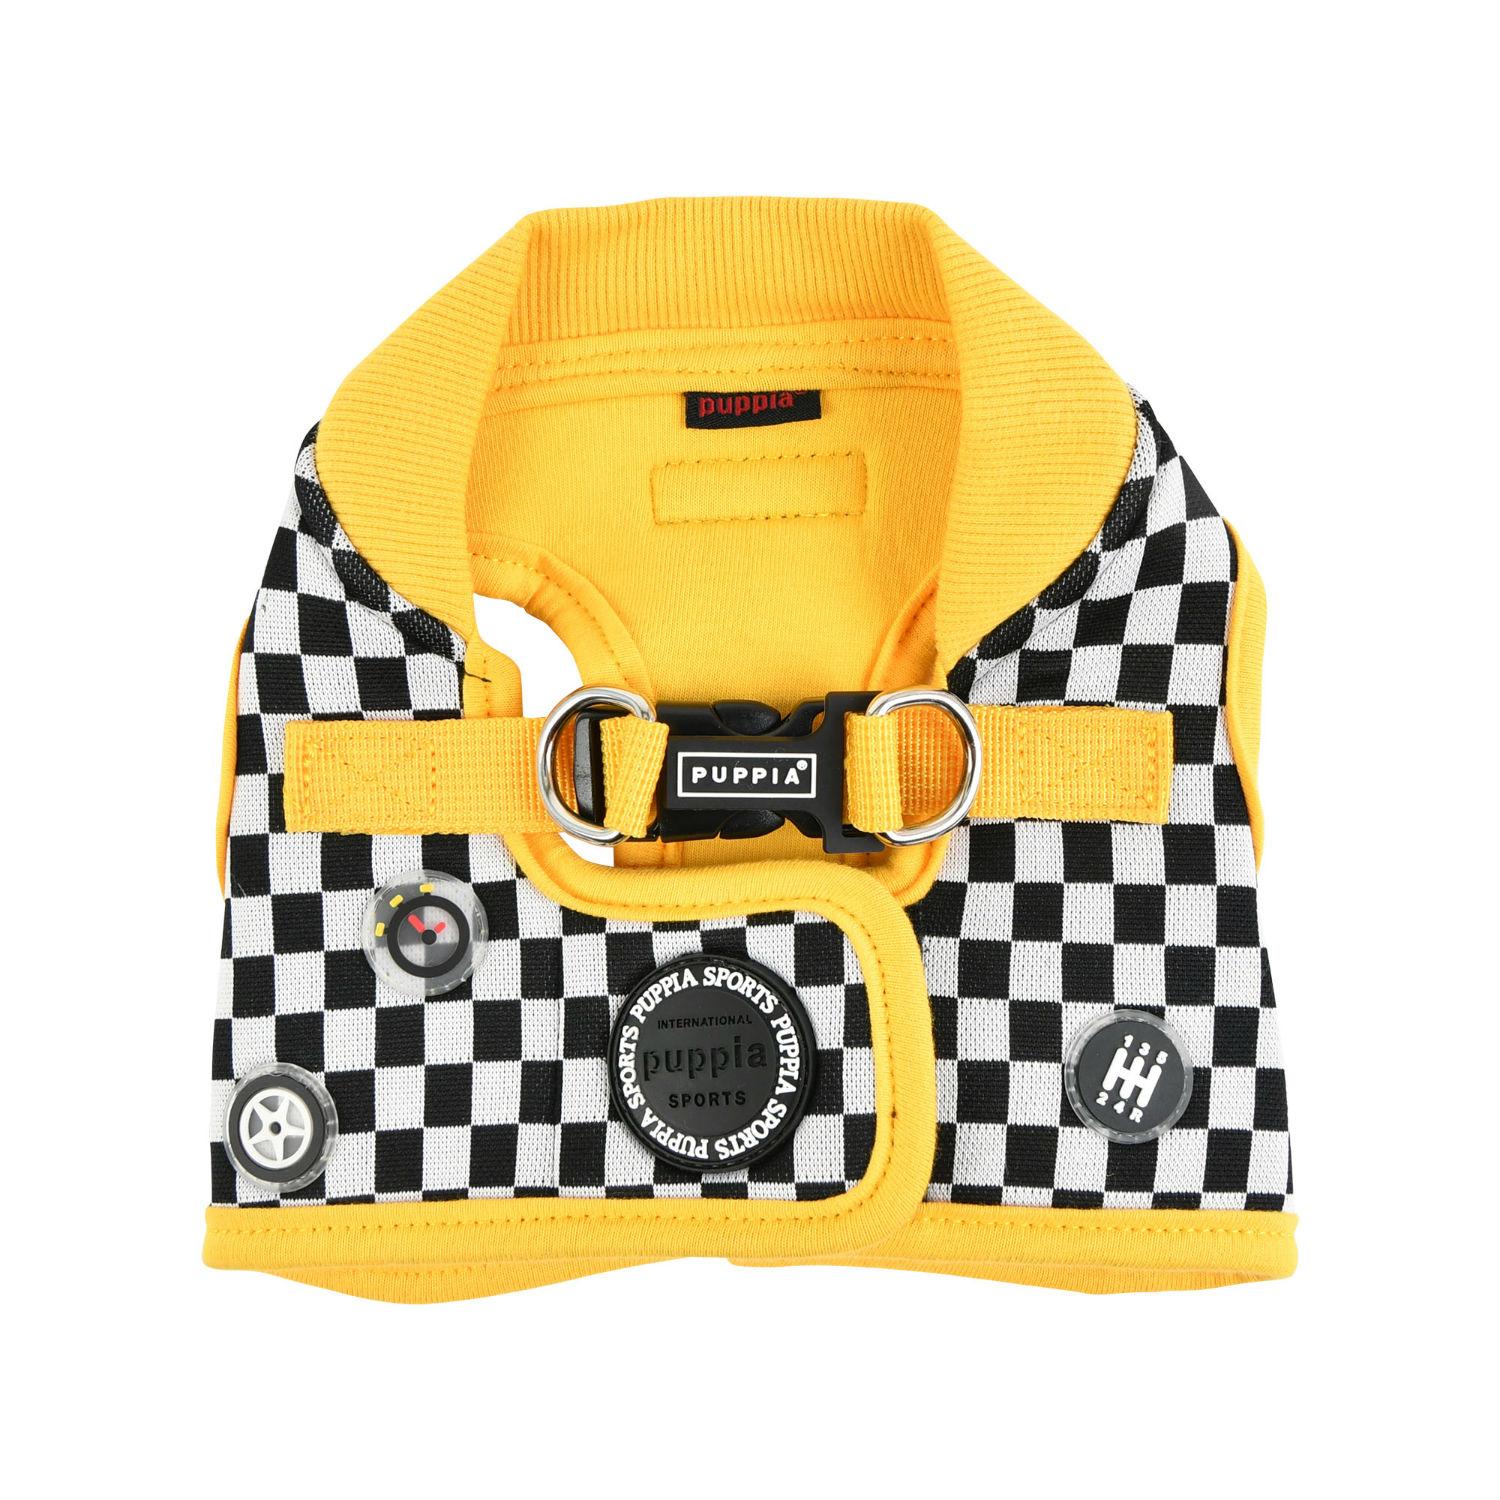 Racer Vest Dog Harness by Puppia - Yellow